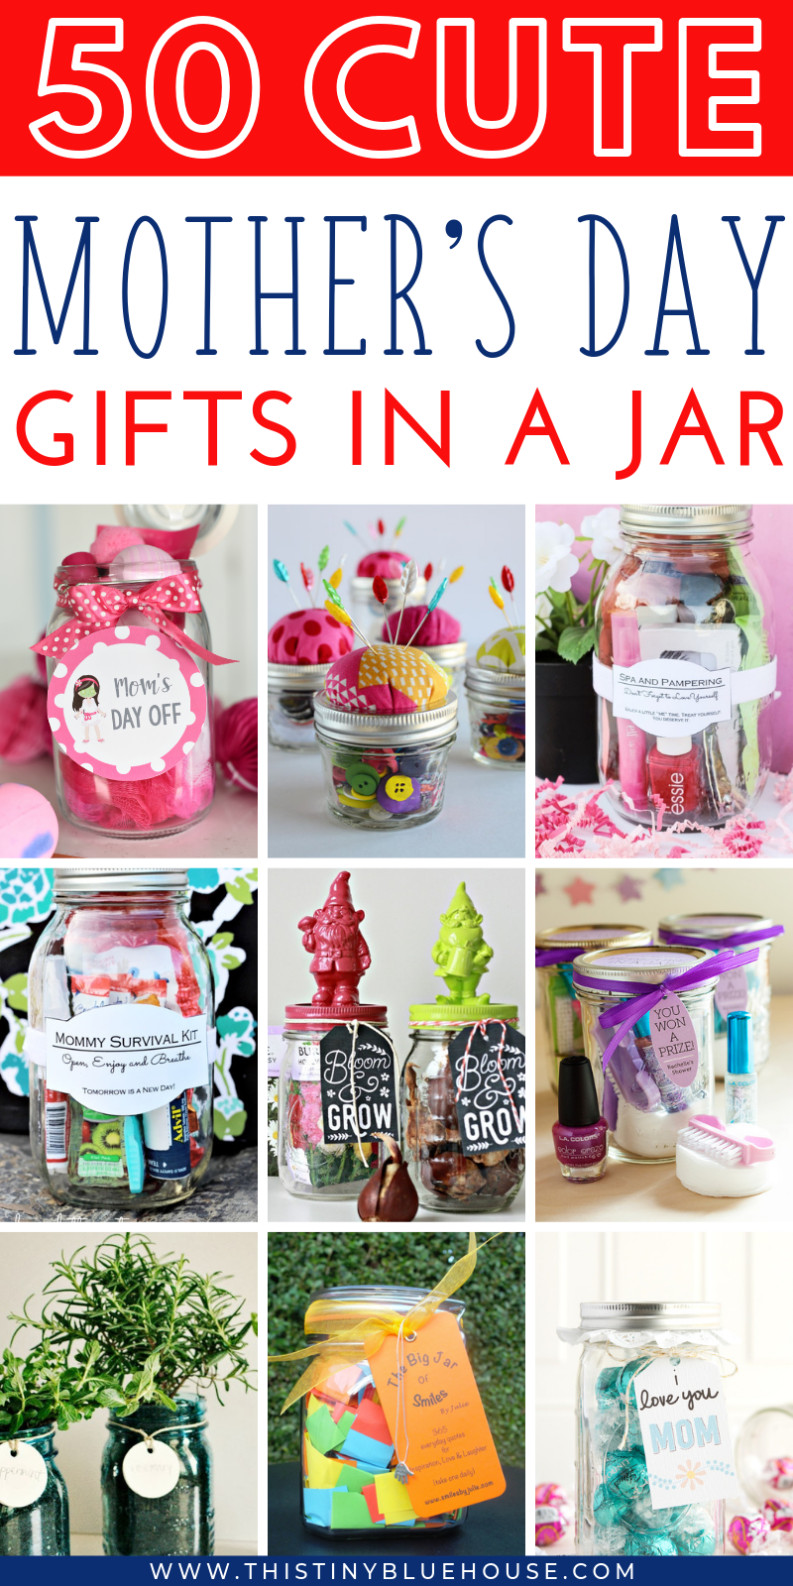 Thoughtful Mother's Day Gifts
 50 Thoughtful Creative Mother s Day Gifts In A Jar